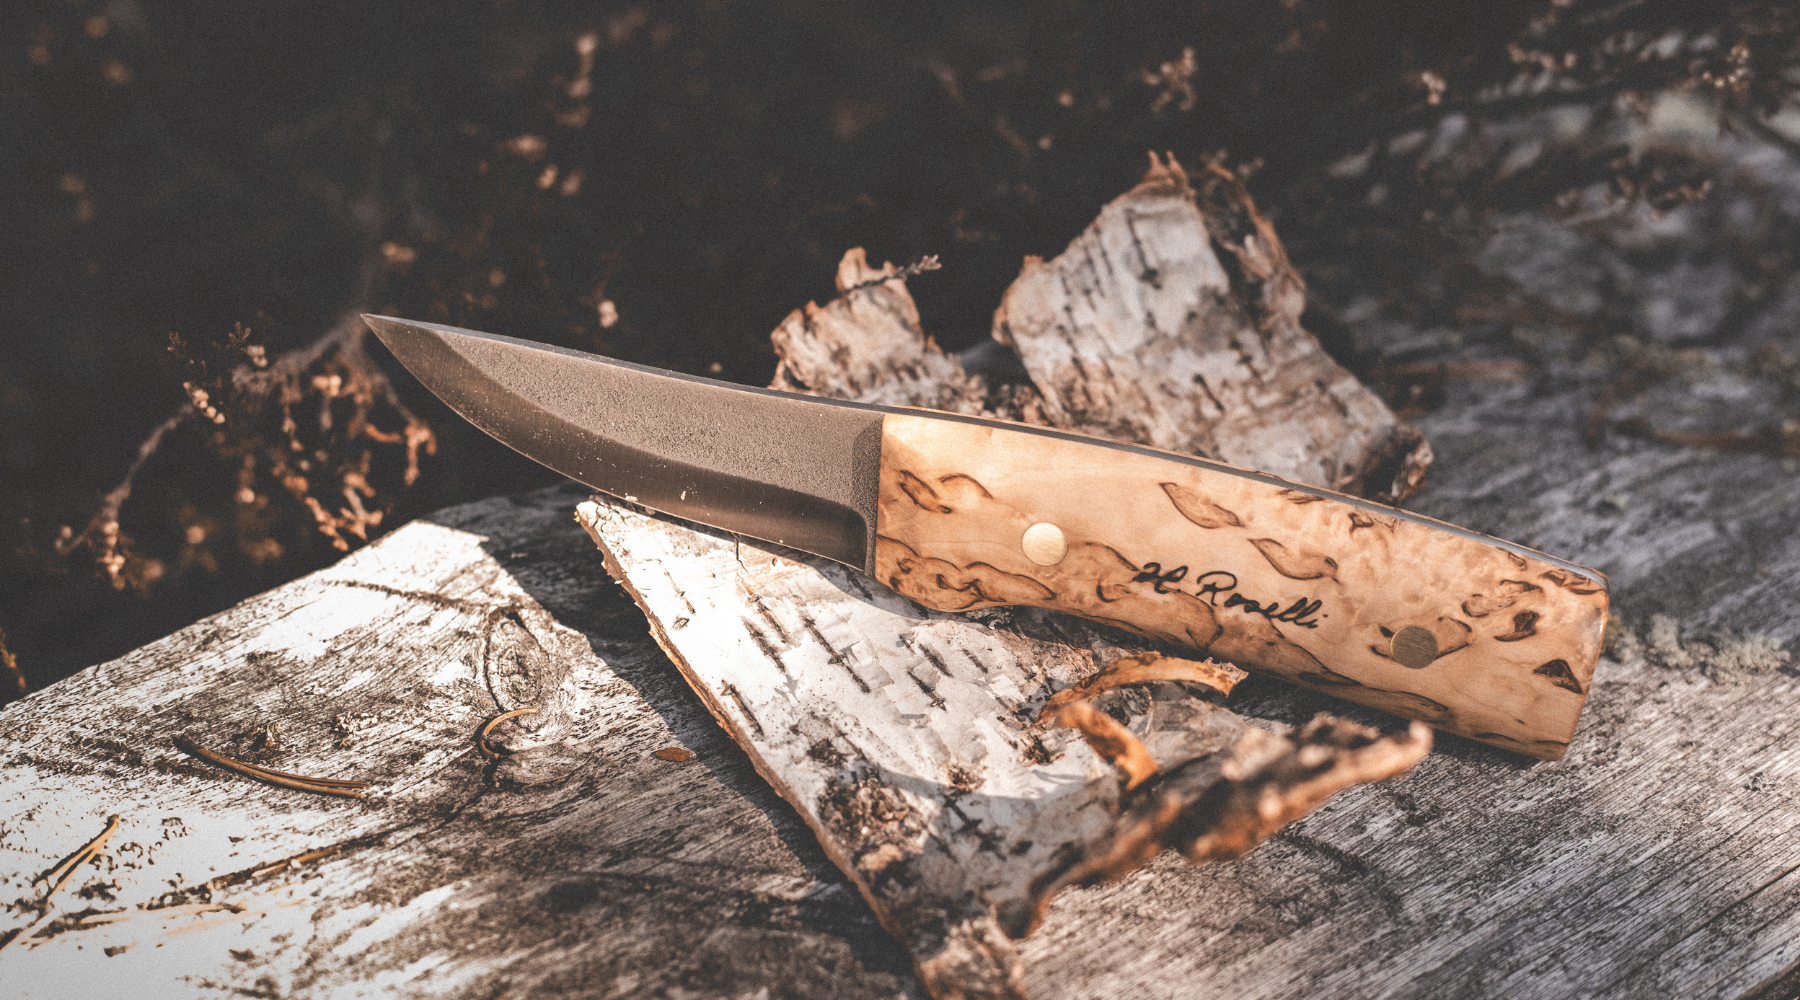 Roselli's handmade Finnish hunting knife in model "Hunting knife full tang" with handle made of curly birch